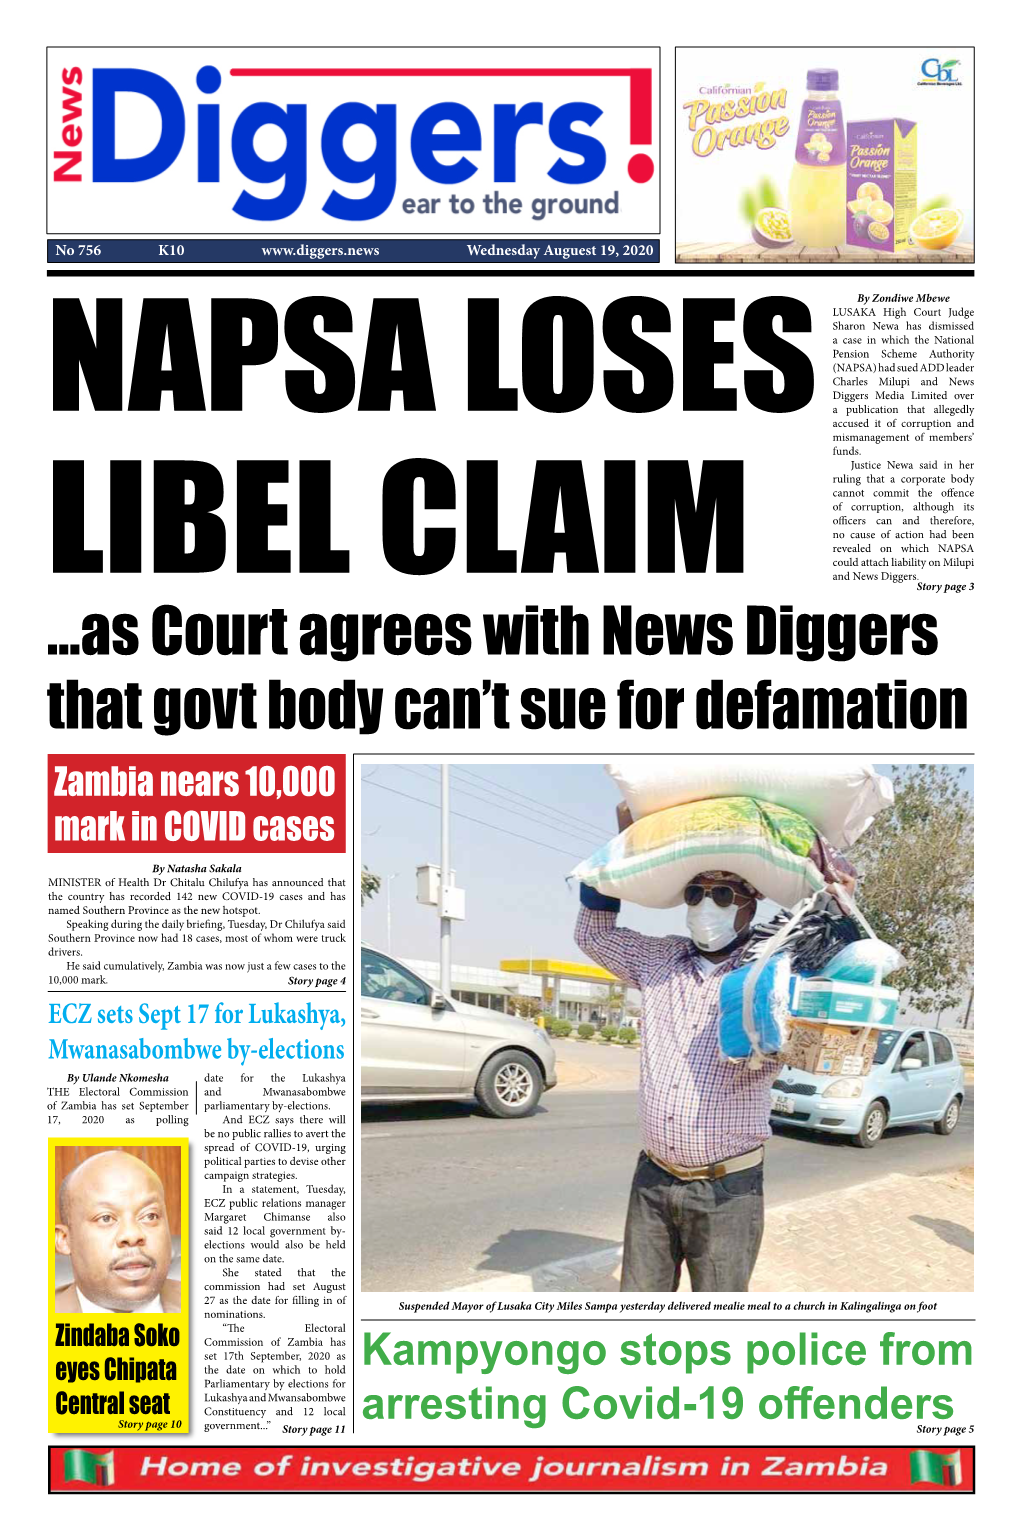 As Court Agrees with News Diggers That Govt Body Can't Sue For